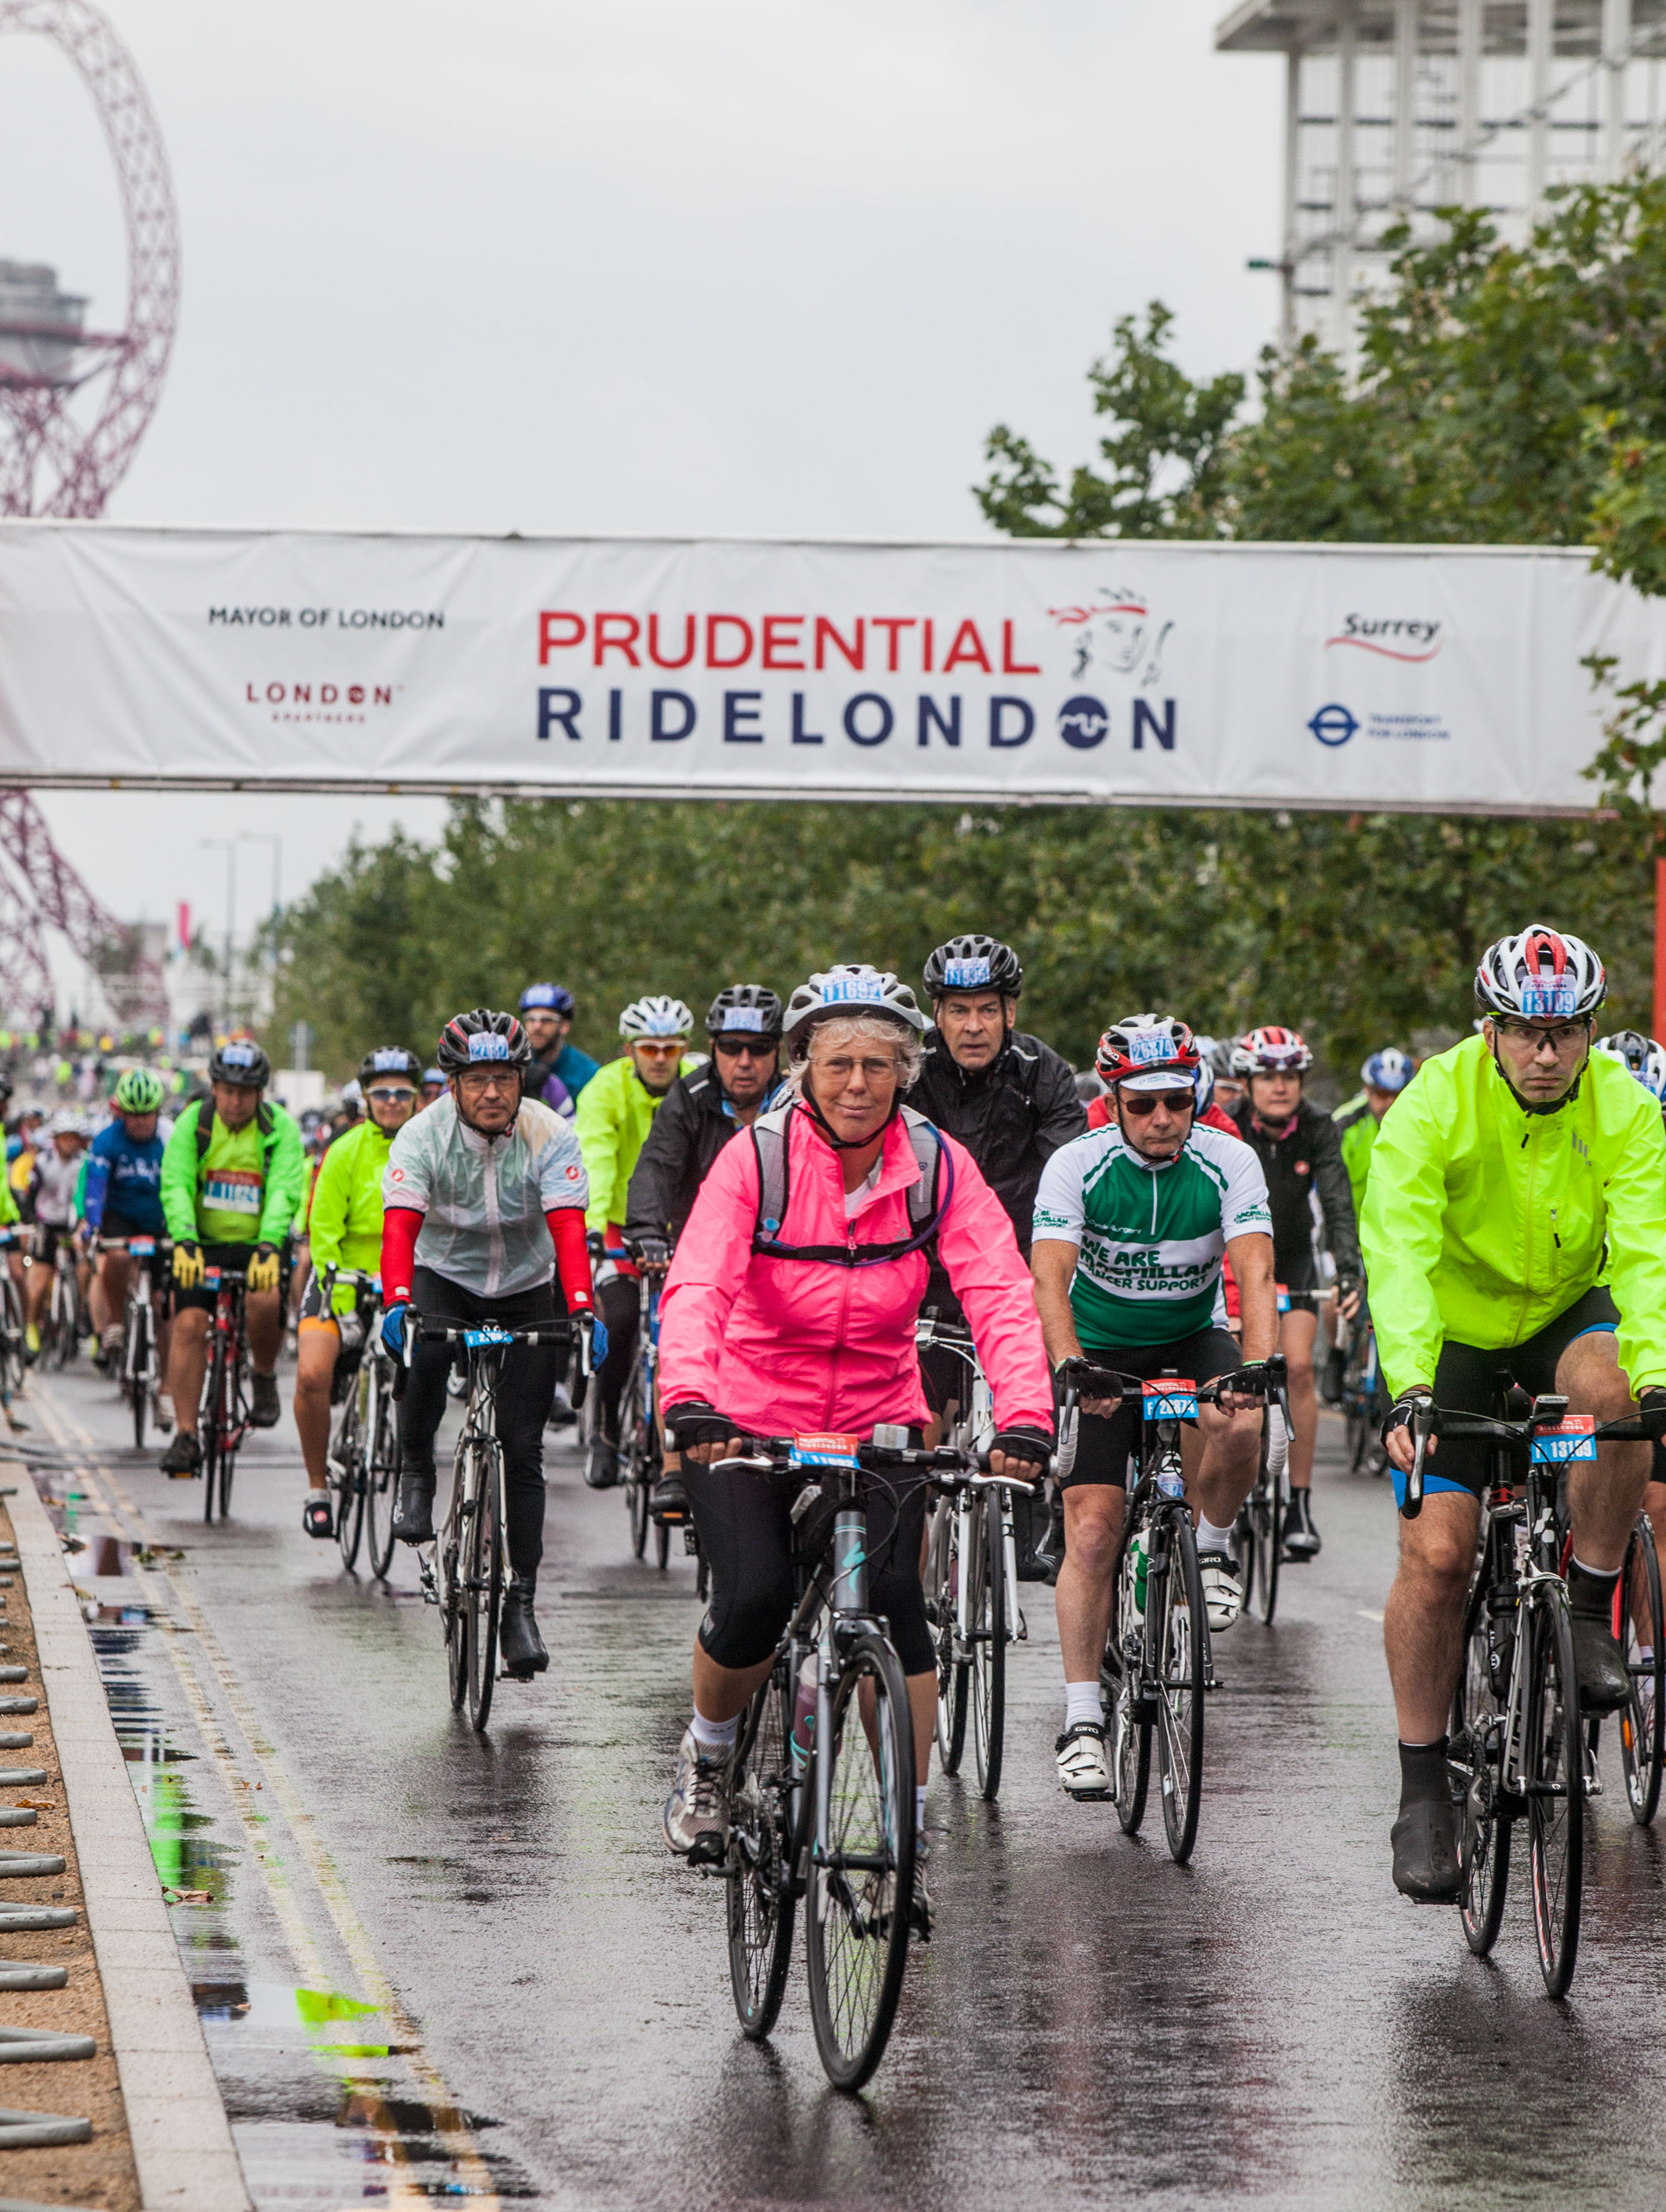 Cyclists under the RideLondon 2014 banner